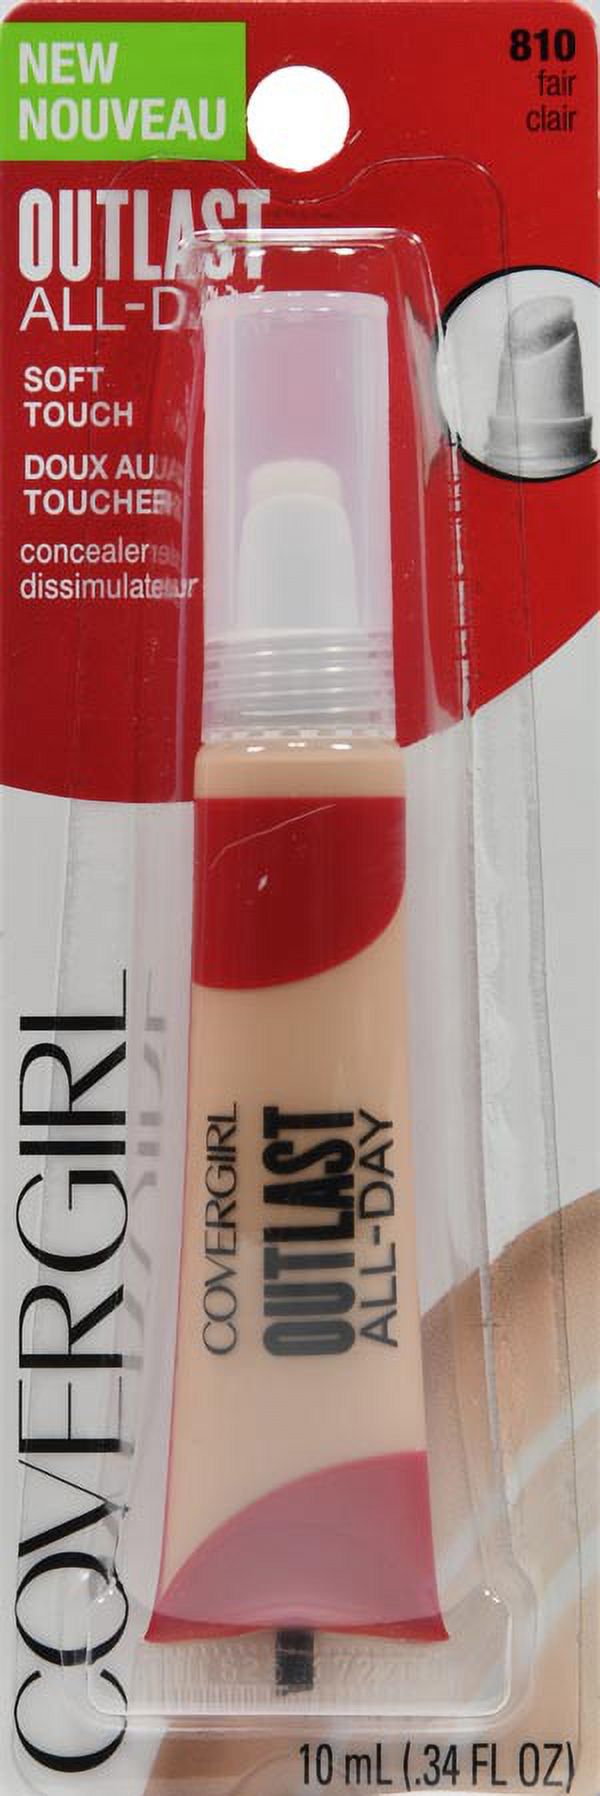 COVERGIRL Outlast All-Day Soft Touch Concealer, Fair 810, .34 fl oz - image 3 of 3